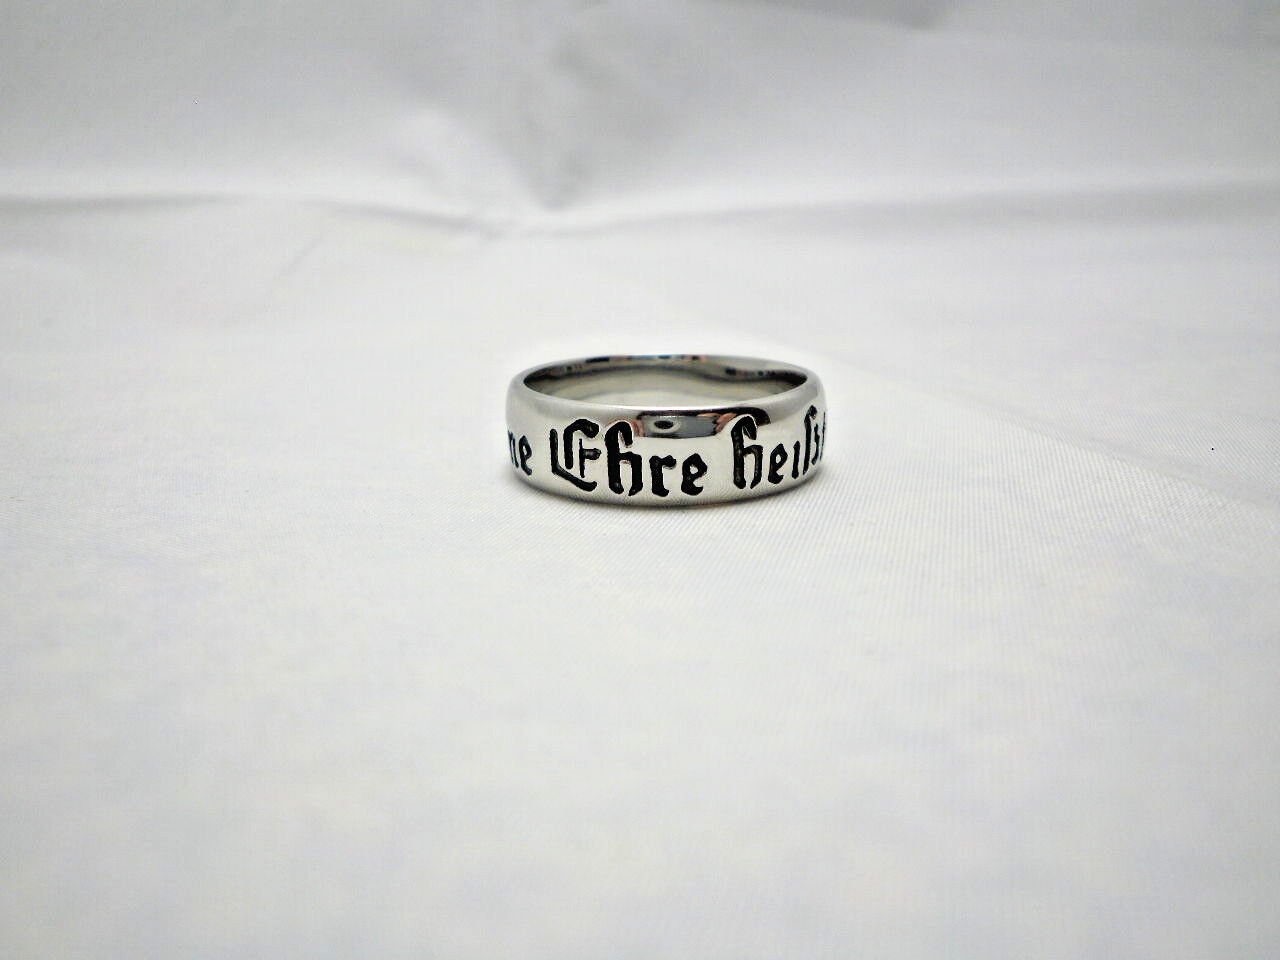  WWII German Ring Reproduction (Honor)